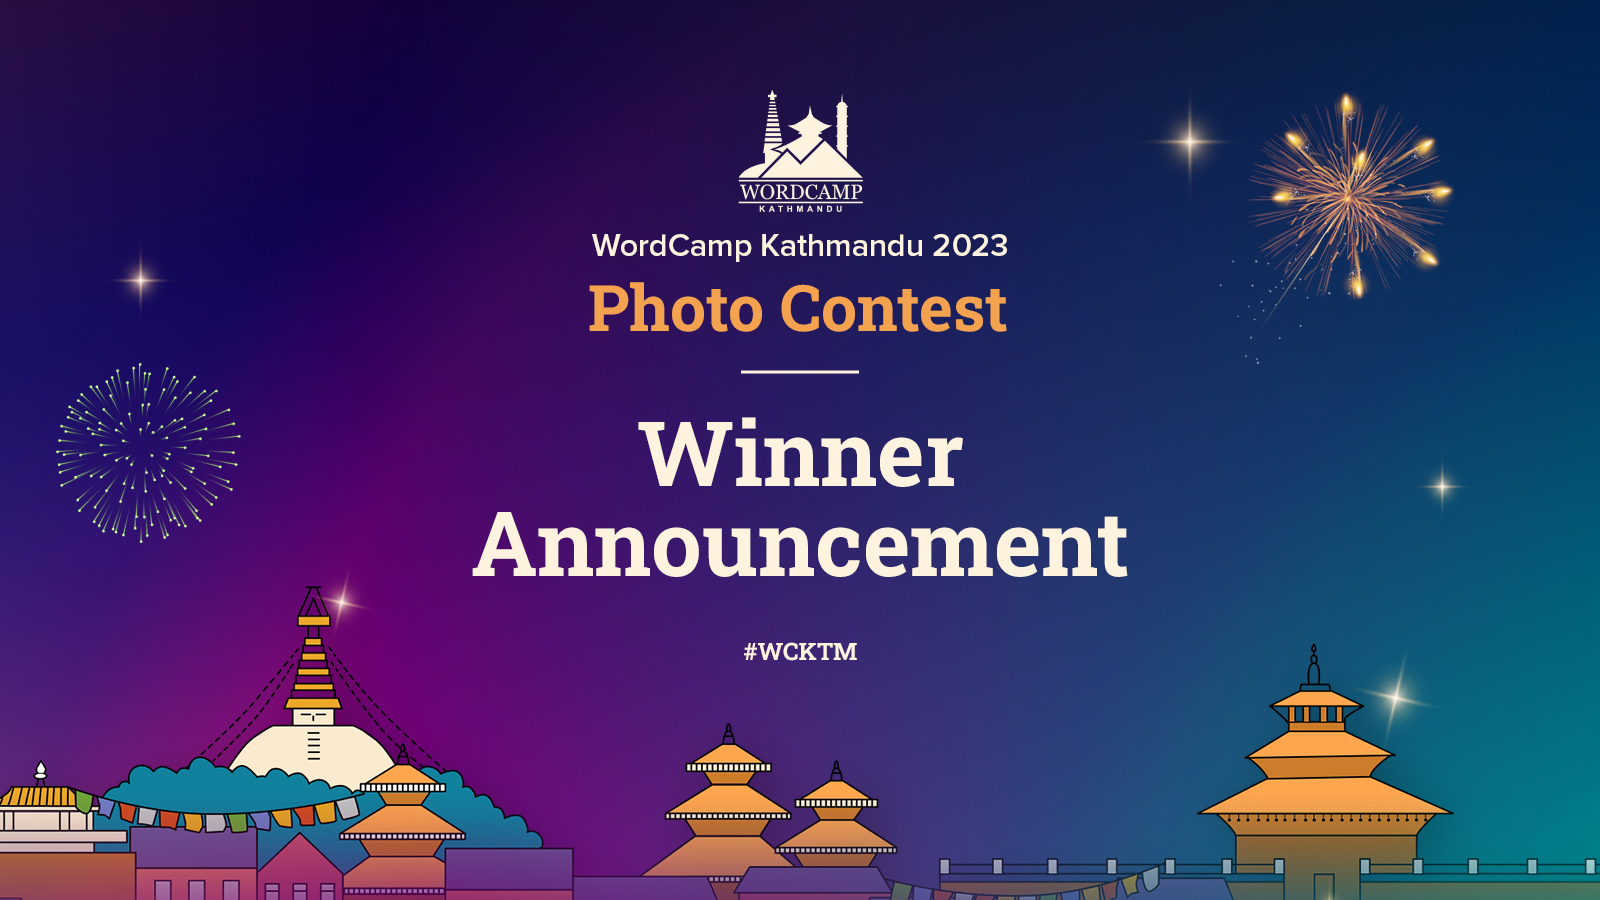 Announcing the Winners of Photo Contest